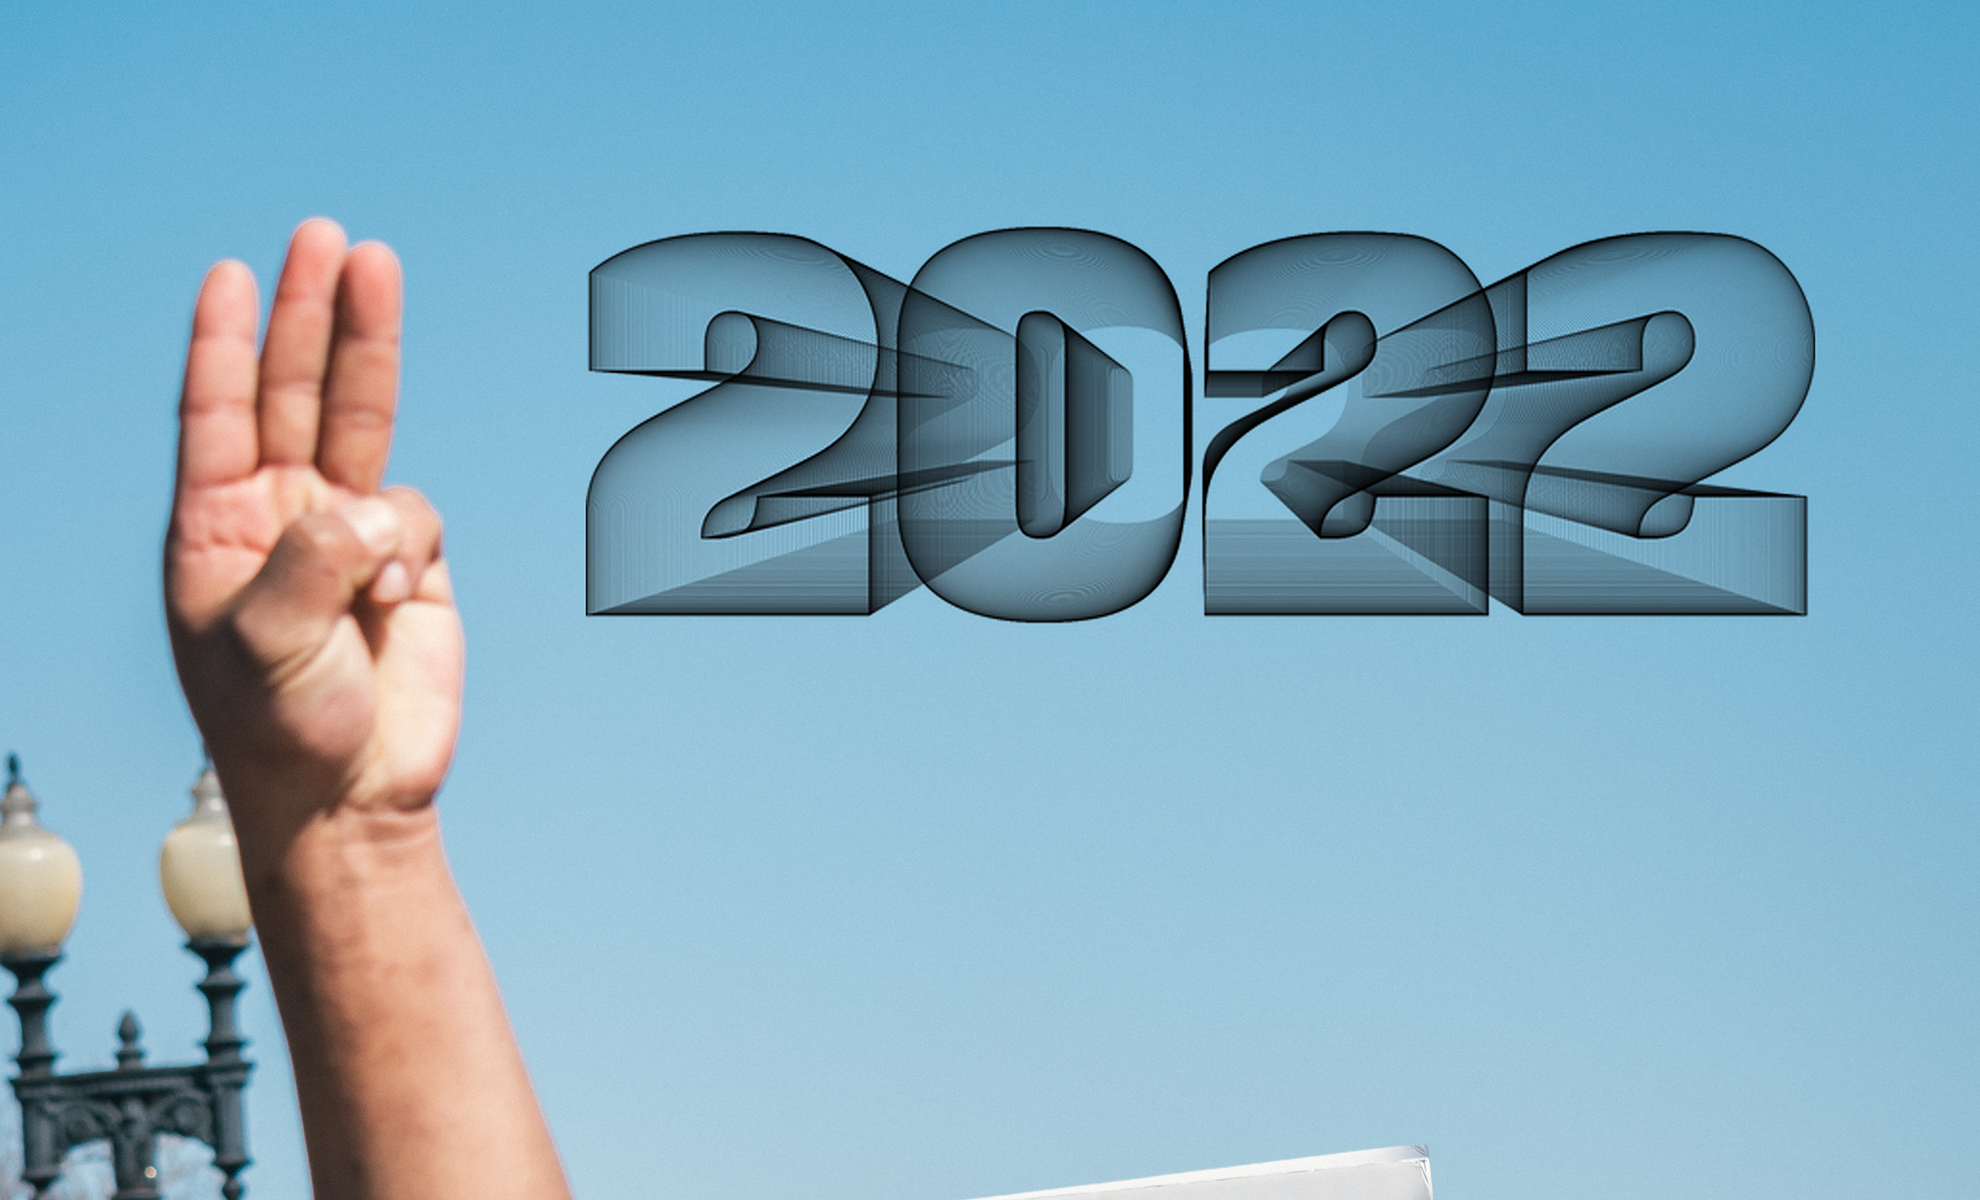 3 Tips for the Second Half of 2022